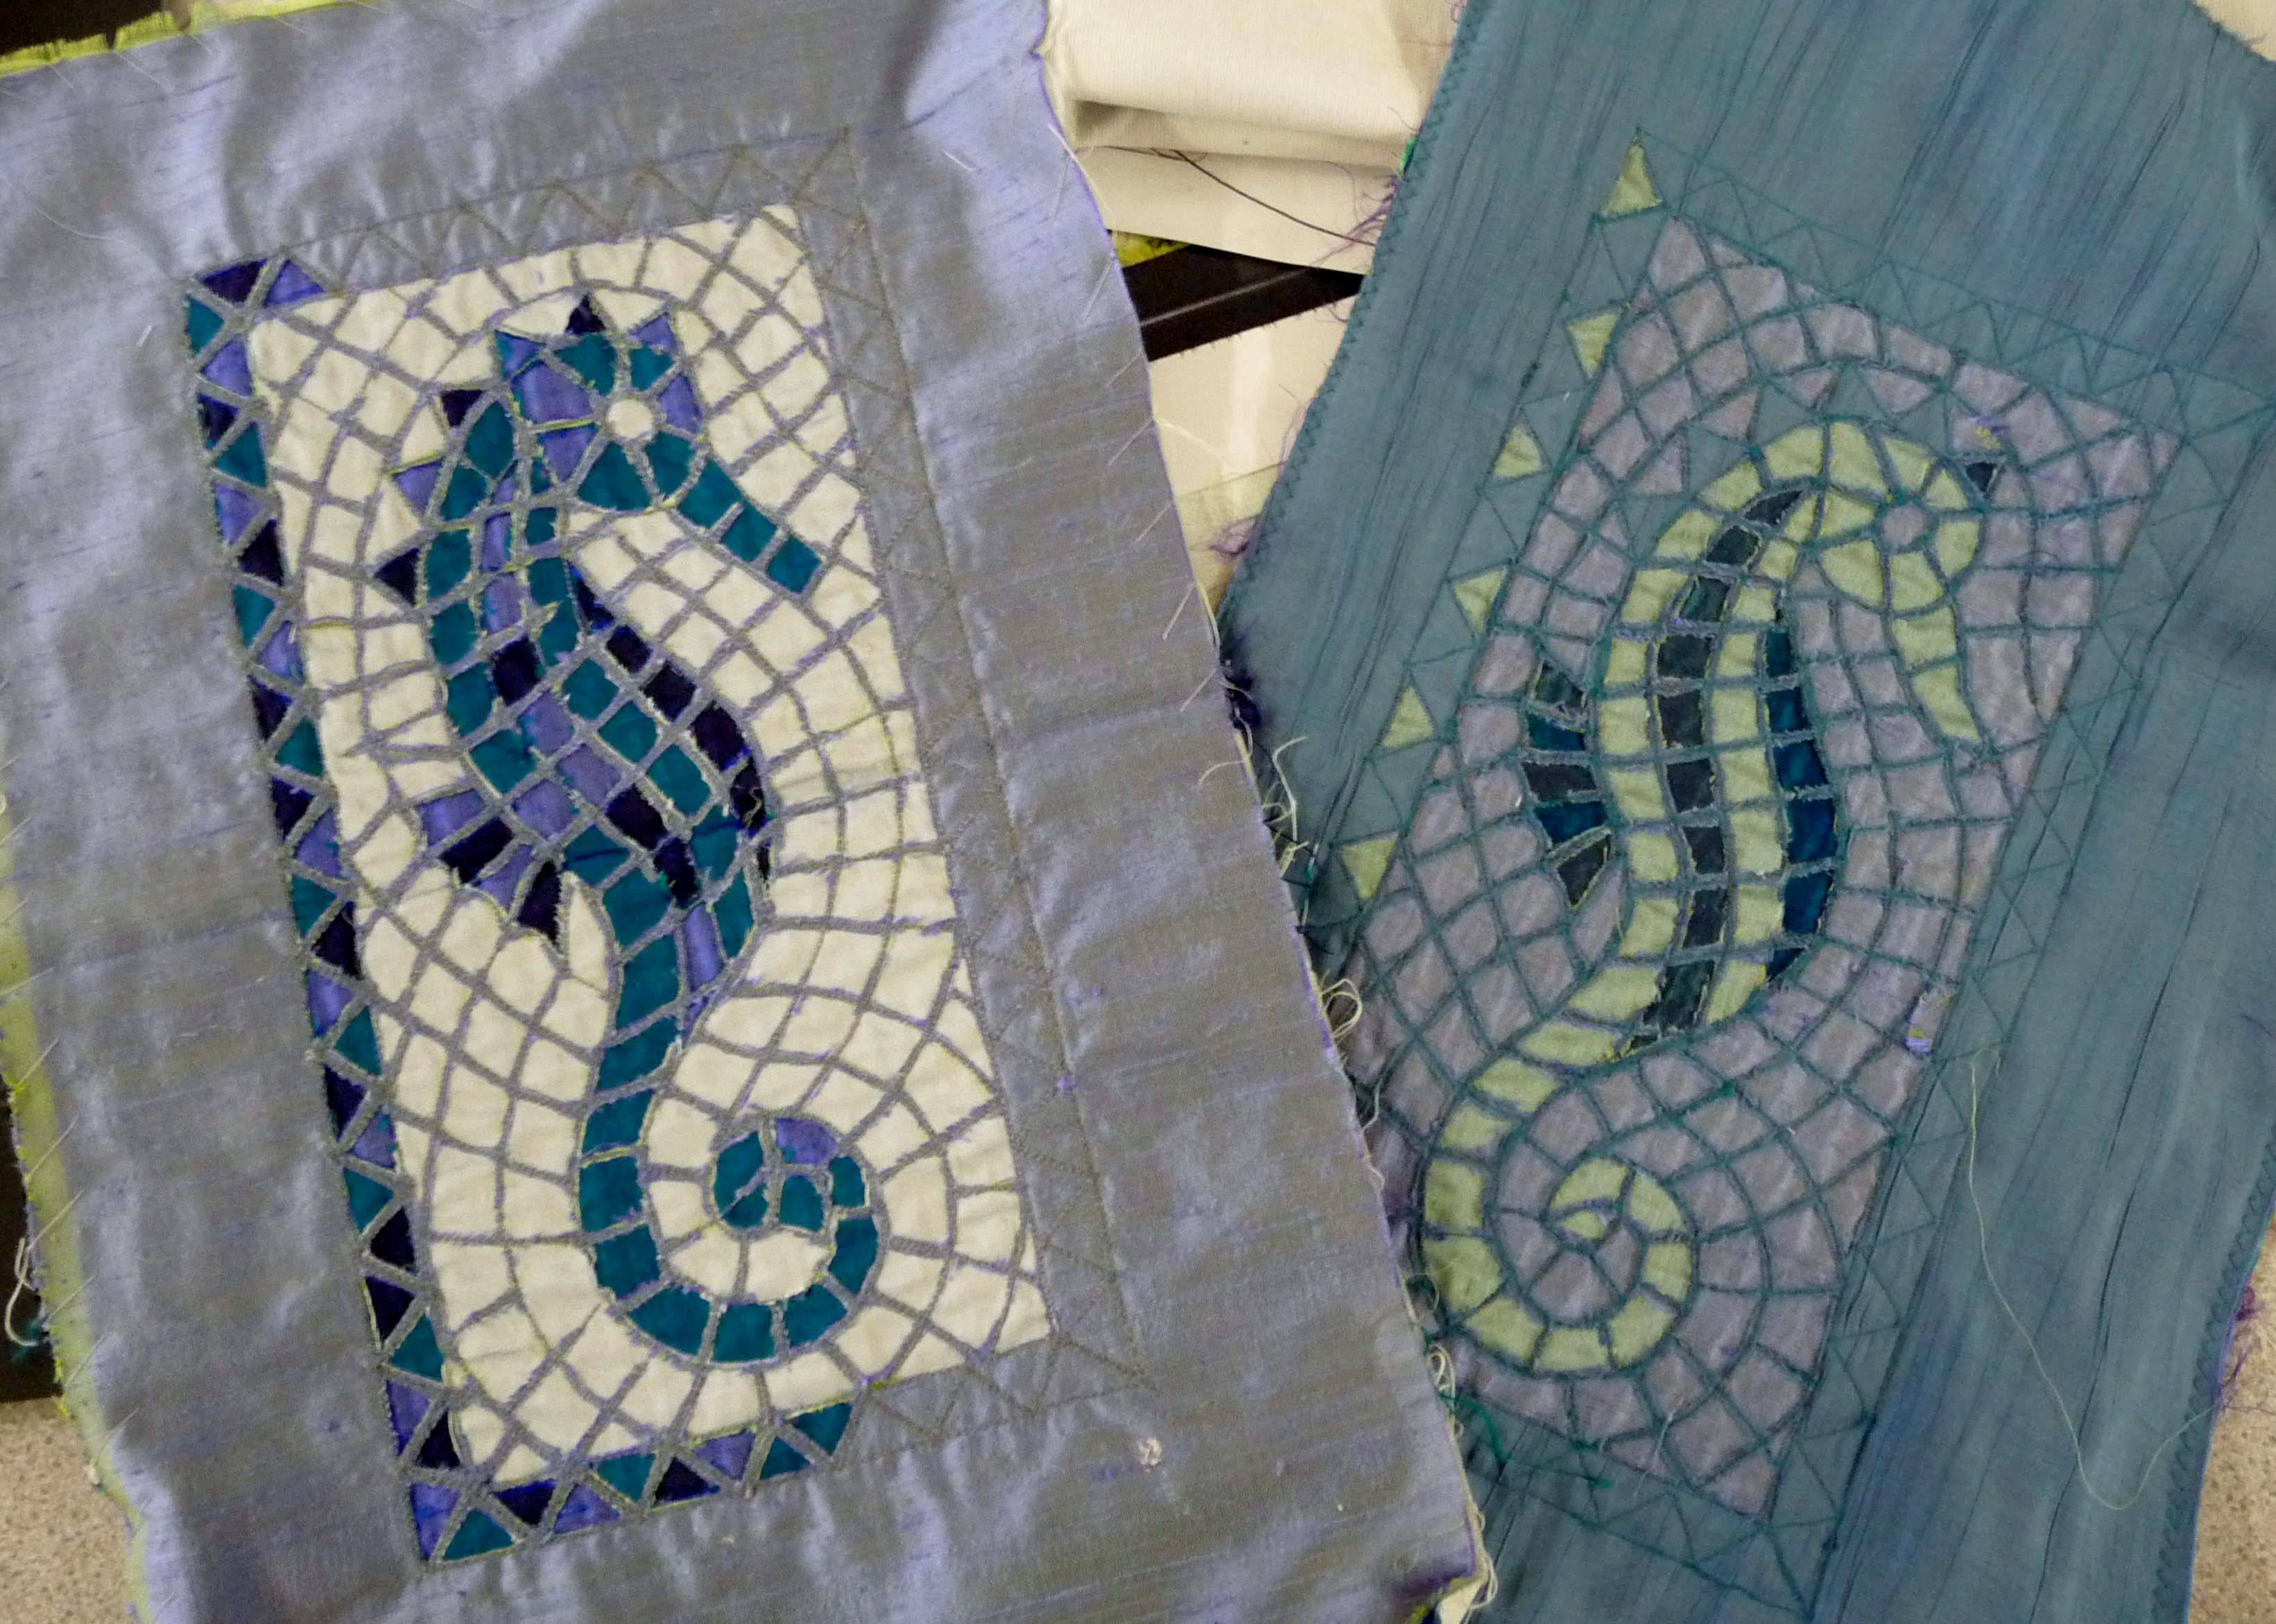 SEAHORSES, reverse applique by Hilary McCormack